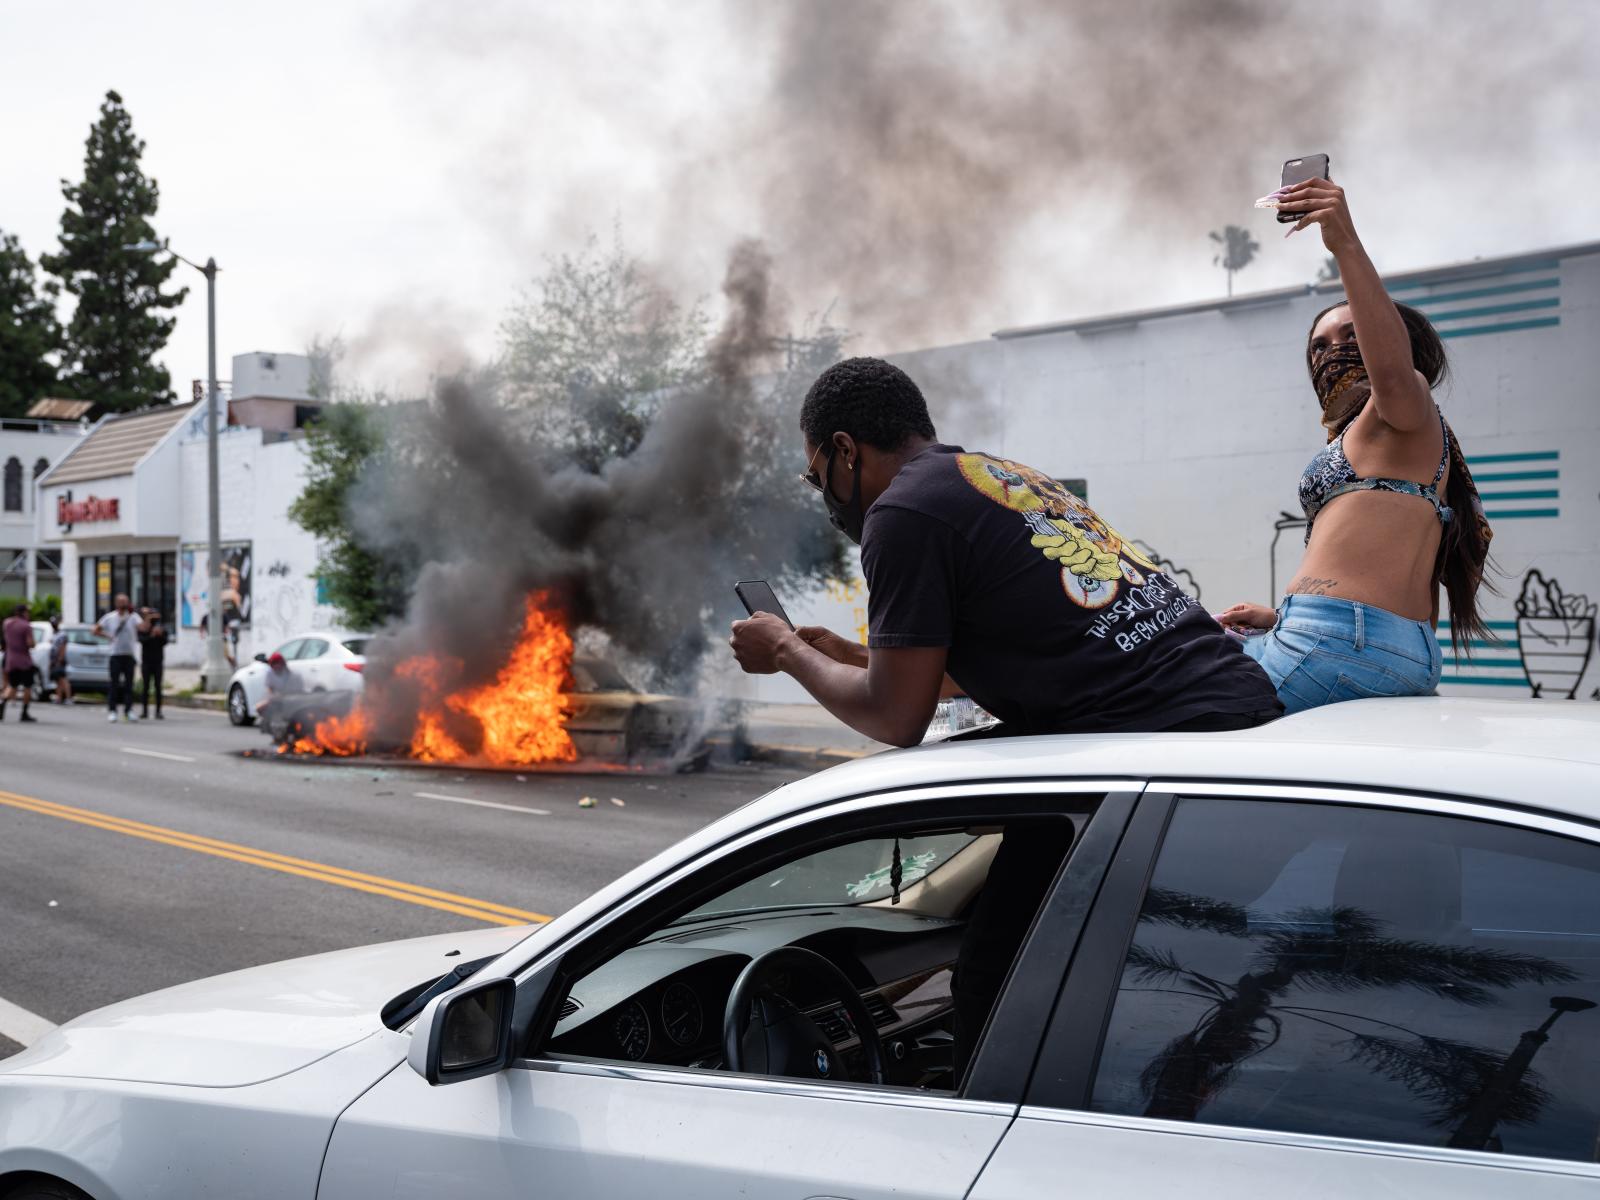 Selfies and a Burning Car | Buy this image